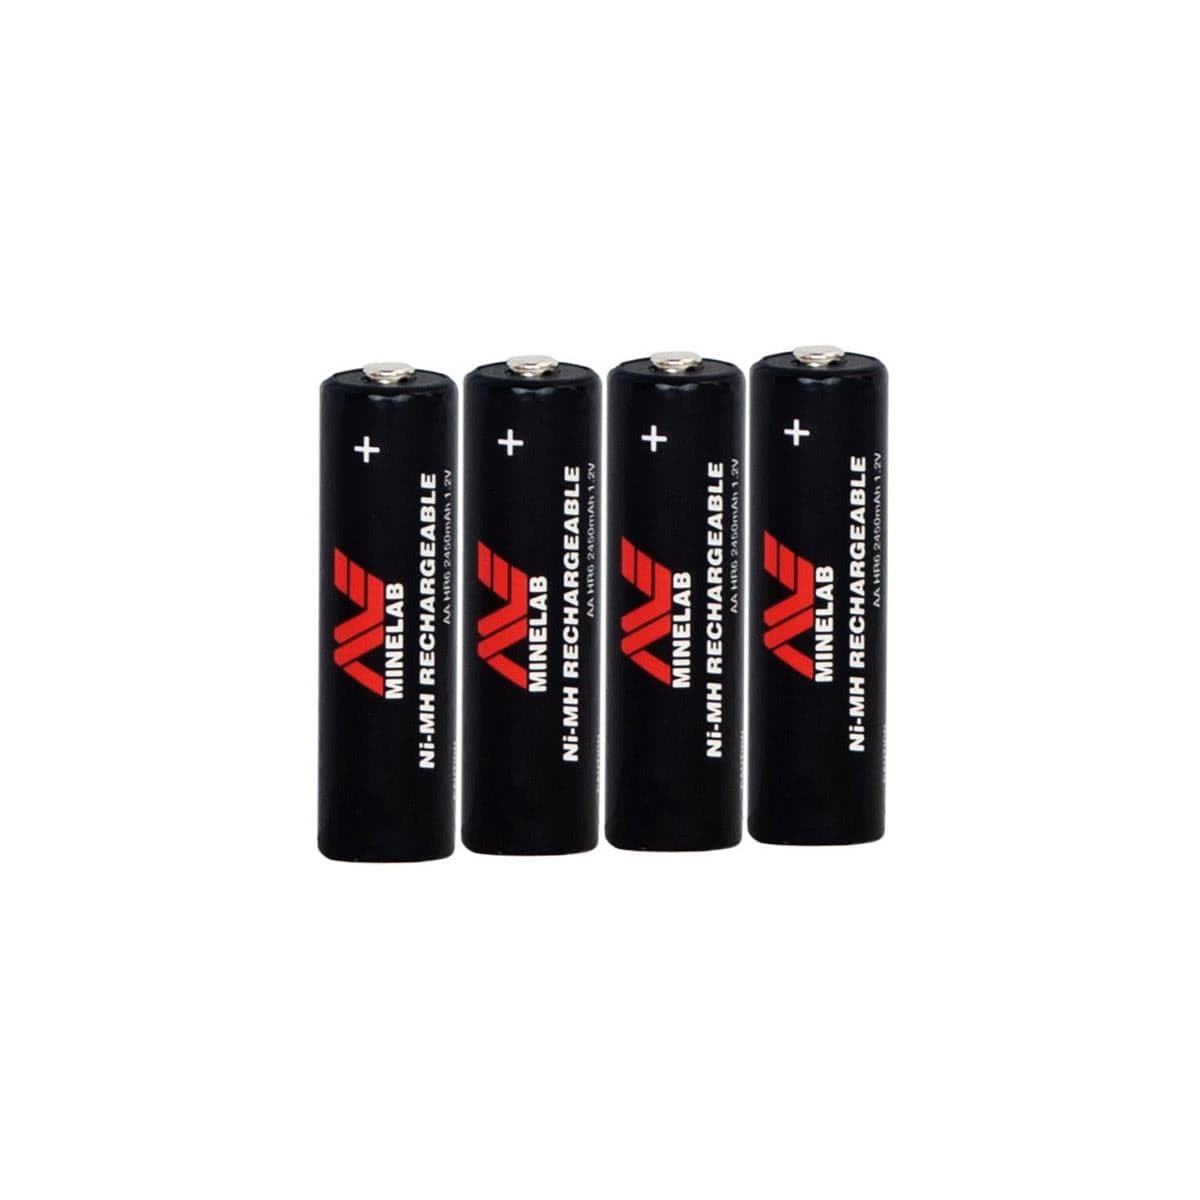 Minelab Metal Detector Coil Minelab AA 2450mAh Rechargeable Ni-MH Battery, 4-Pack